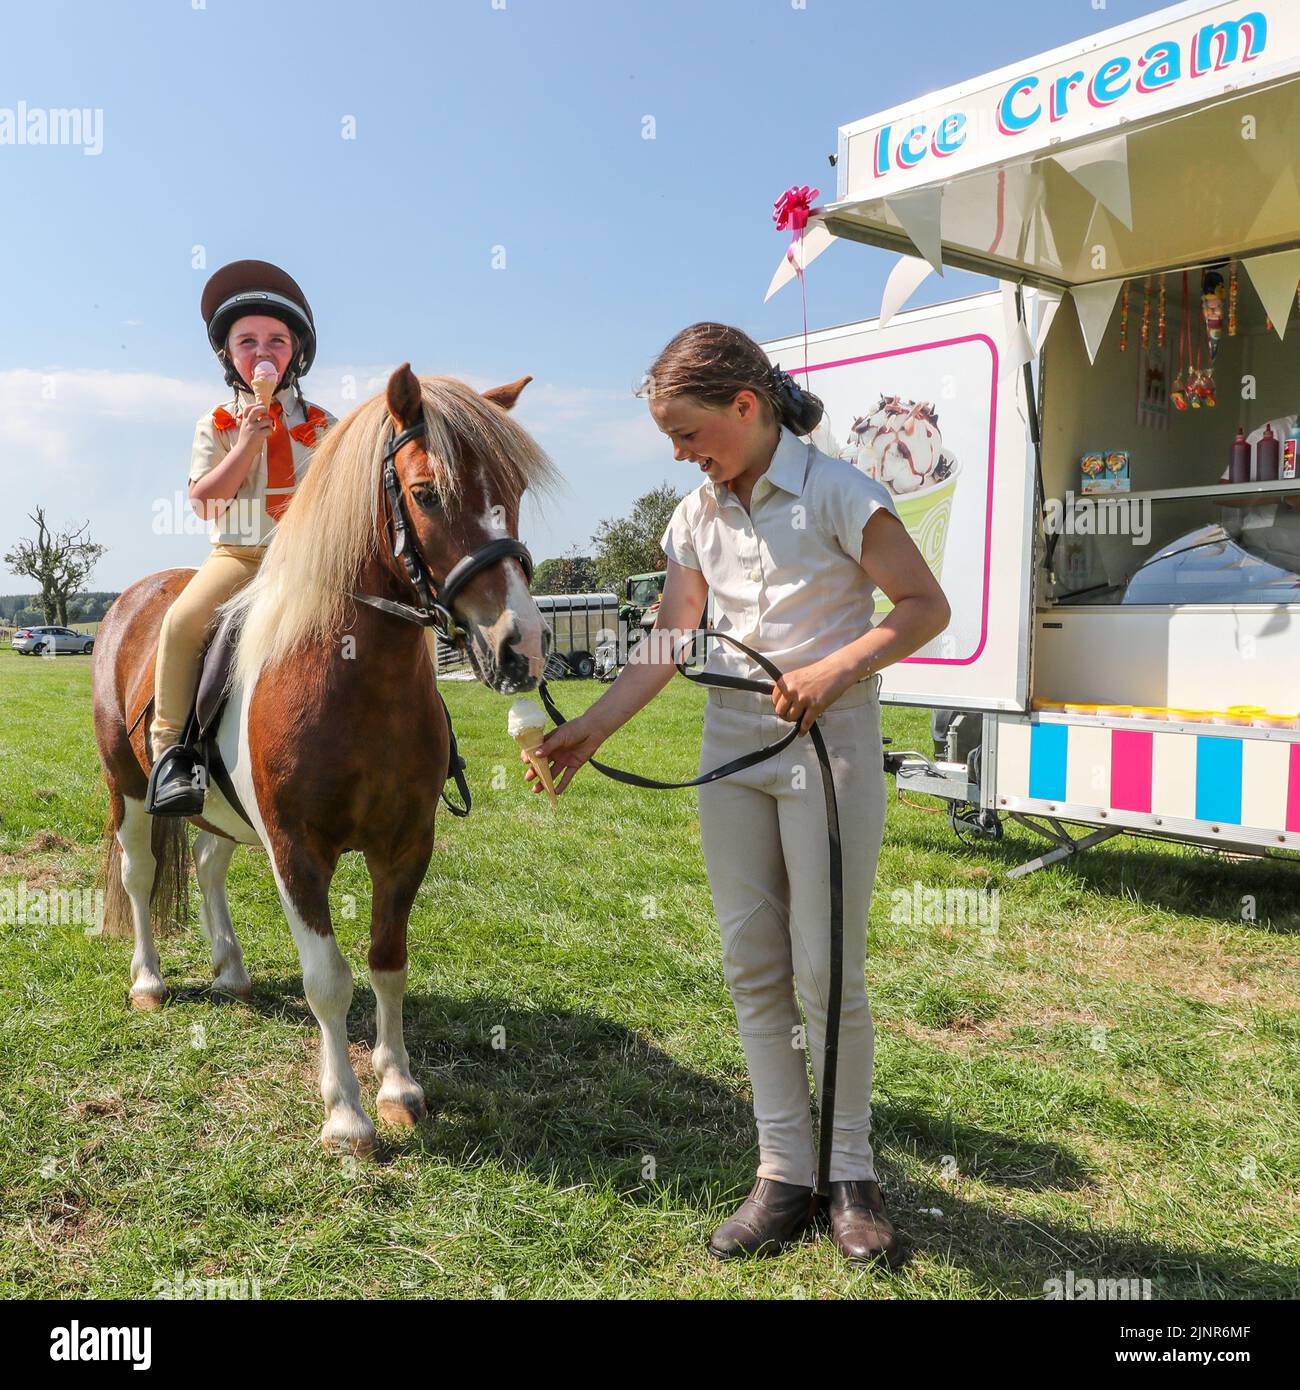 13 August 2022, Craigie, UK. After a tiring and thirsty apprearance at Craigie Country Fair, Micheal, a 12 year old Shetland Pony and his rider Jessica Edgar, aged 5,are rewarded with an ice cream to cool down. Michael's owner Alba Morgan, aged 9, is offering the ice cream to Michael. (Stephanie Edgar, mother is present). Credit: Findlay/ Alamy Live News. Stock Photo